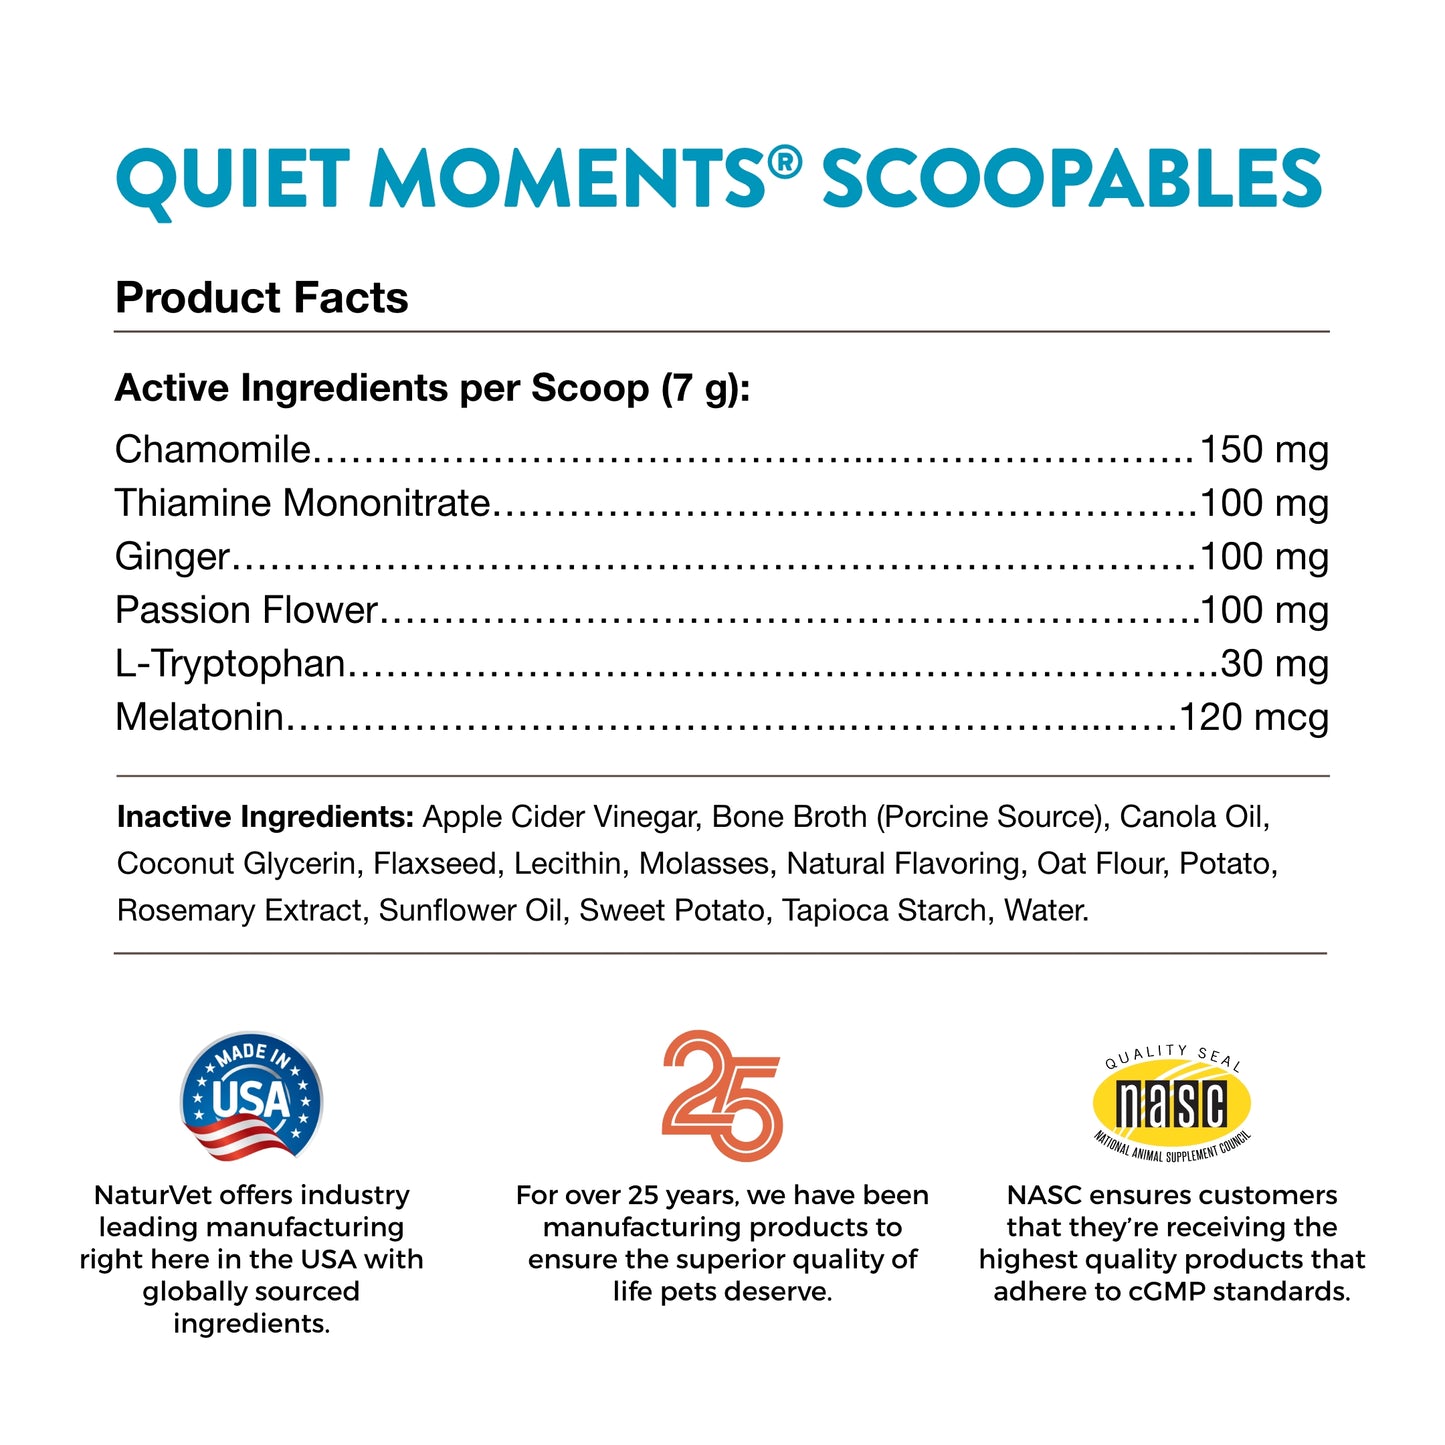 Scoopables Quiet Moments® Calming Aid for Dogs